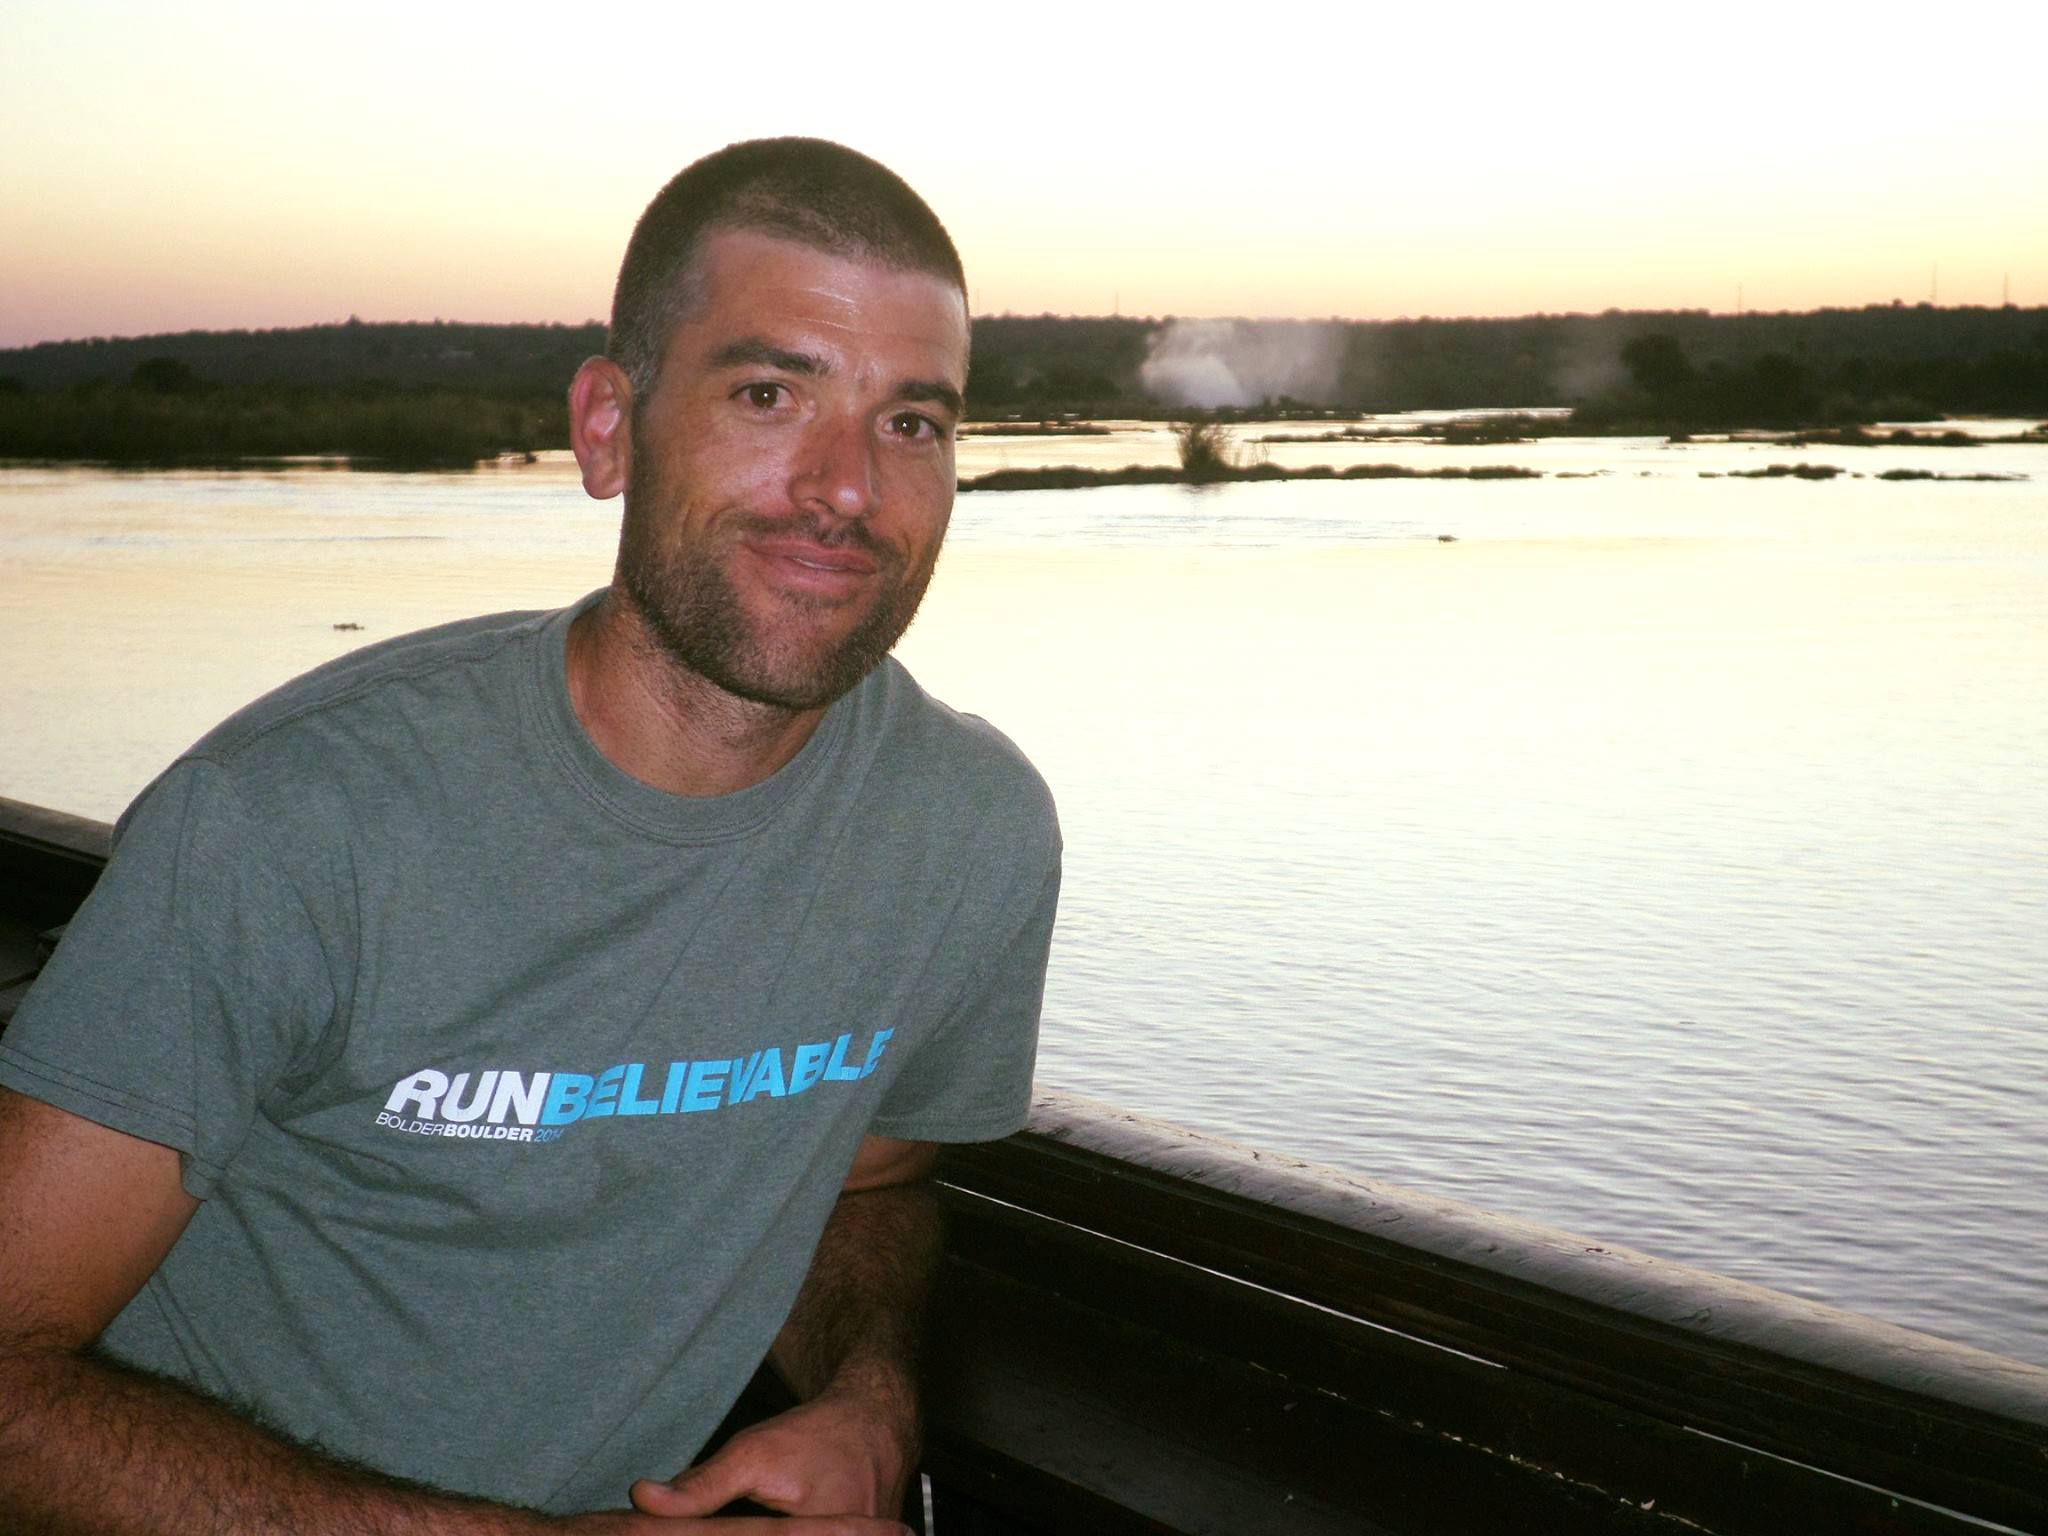 a white man with a close-shaved head and beard stands in front of a lake at dusk. He is smiling with his lips closed and wearing a "RUNbelievable" shirt